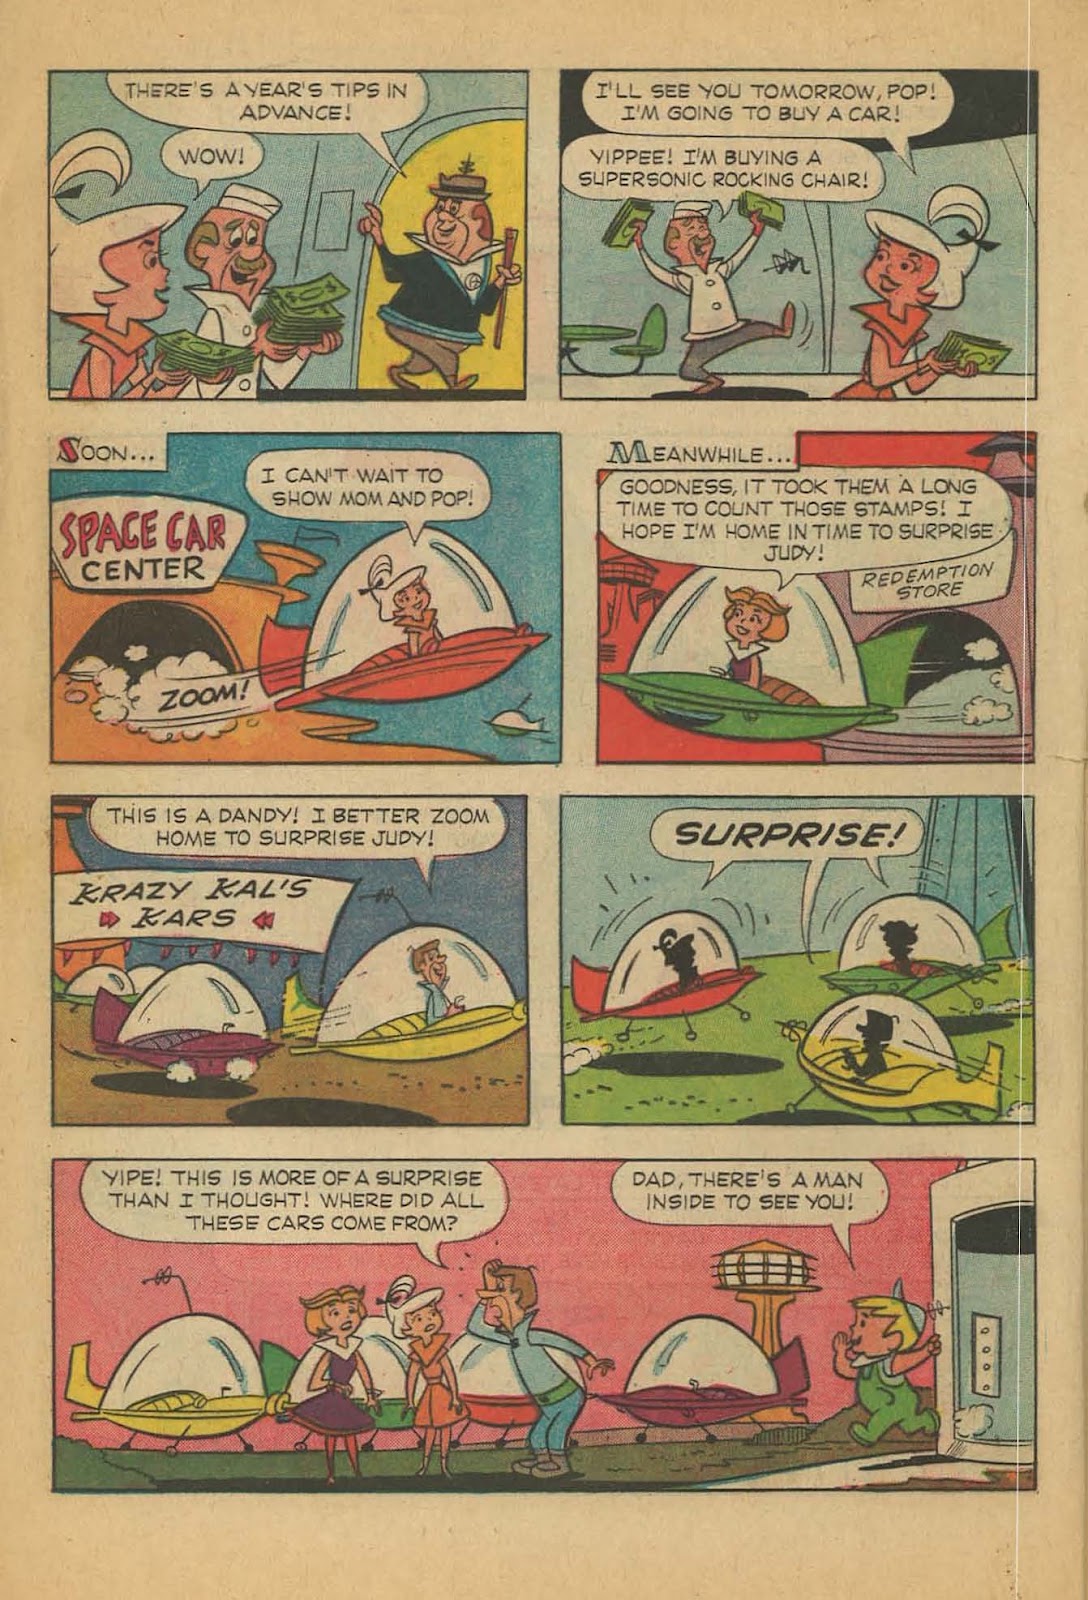 The Jetsons 30 | Read The Jetsons 30 comic online in high quality. Read  Full Comic online for free - Read comics online in high quality .| READ  COMIC ONLINE